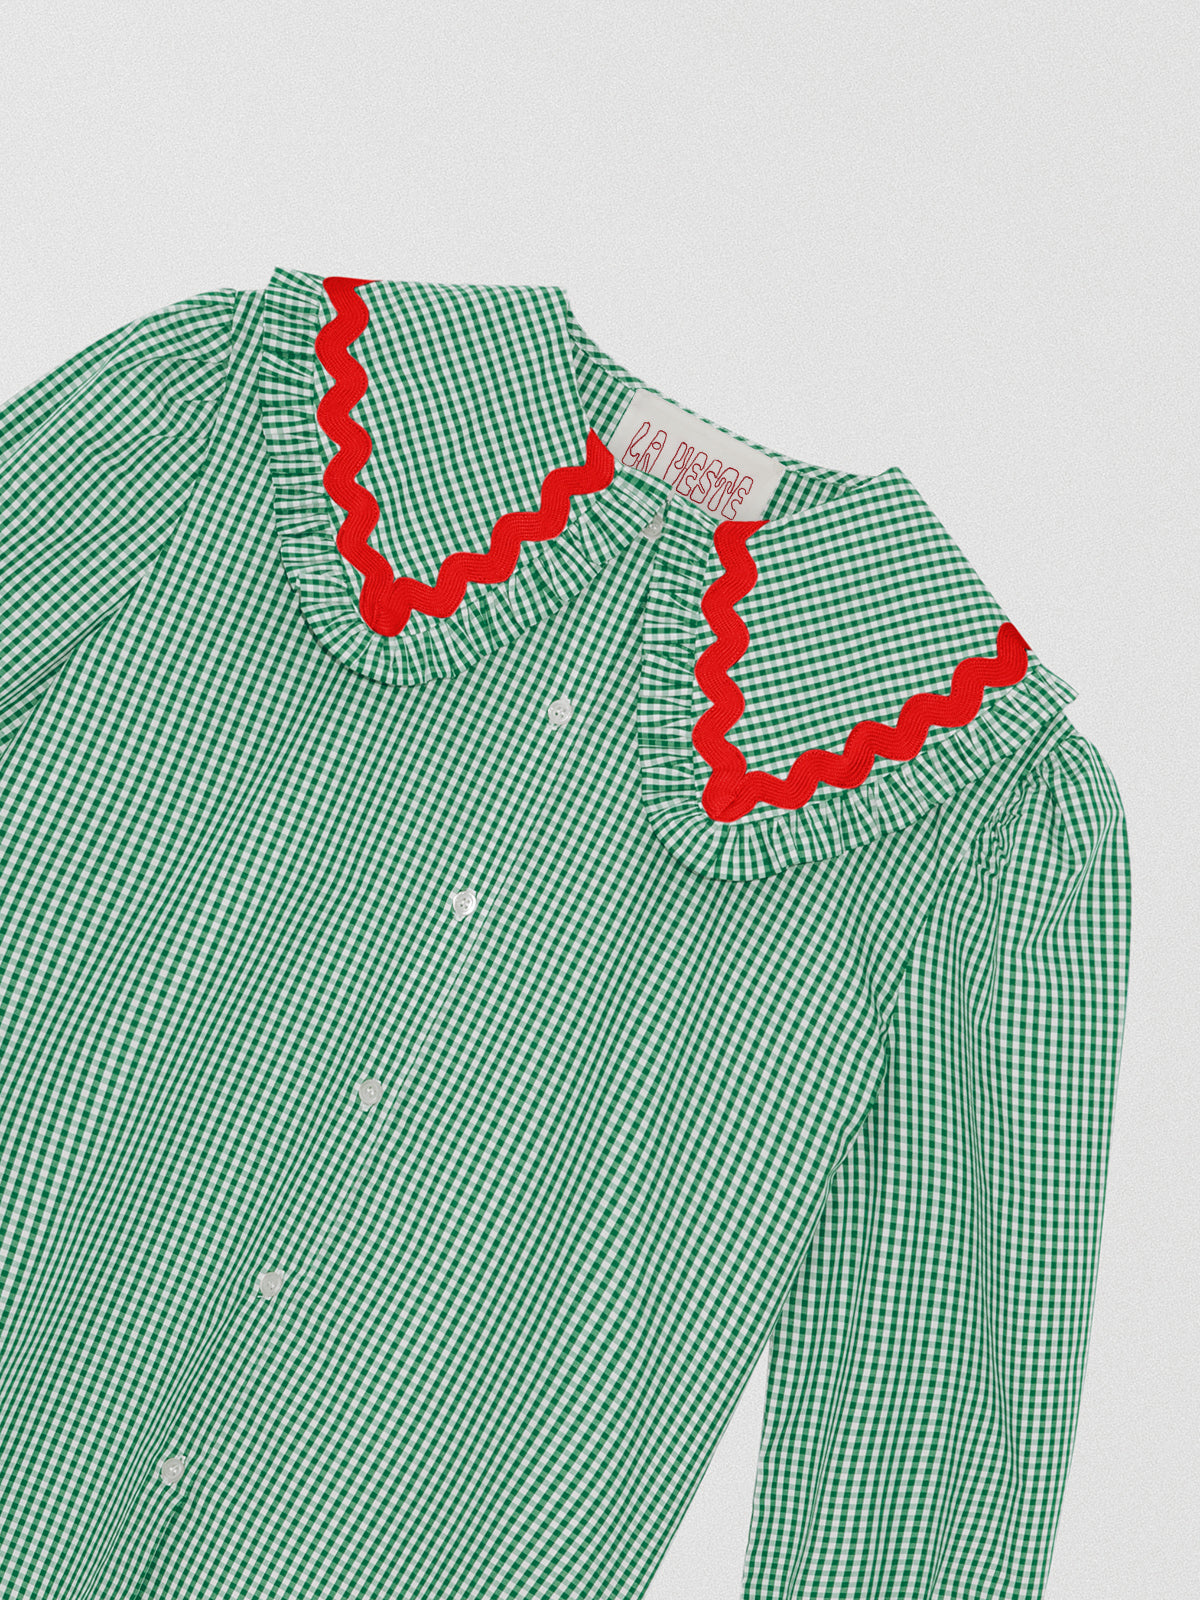 Green and white vichy check shirt made of cotton with red trim detail on the collar